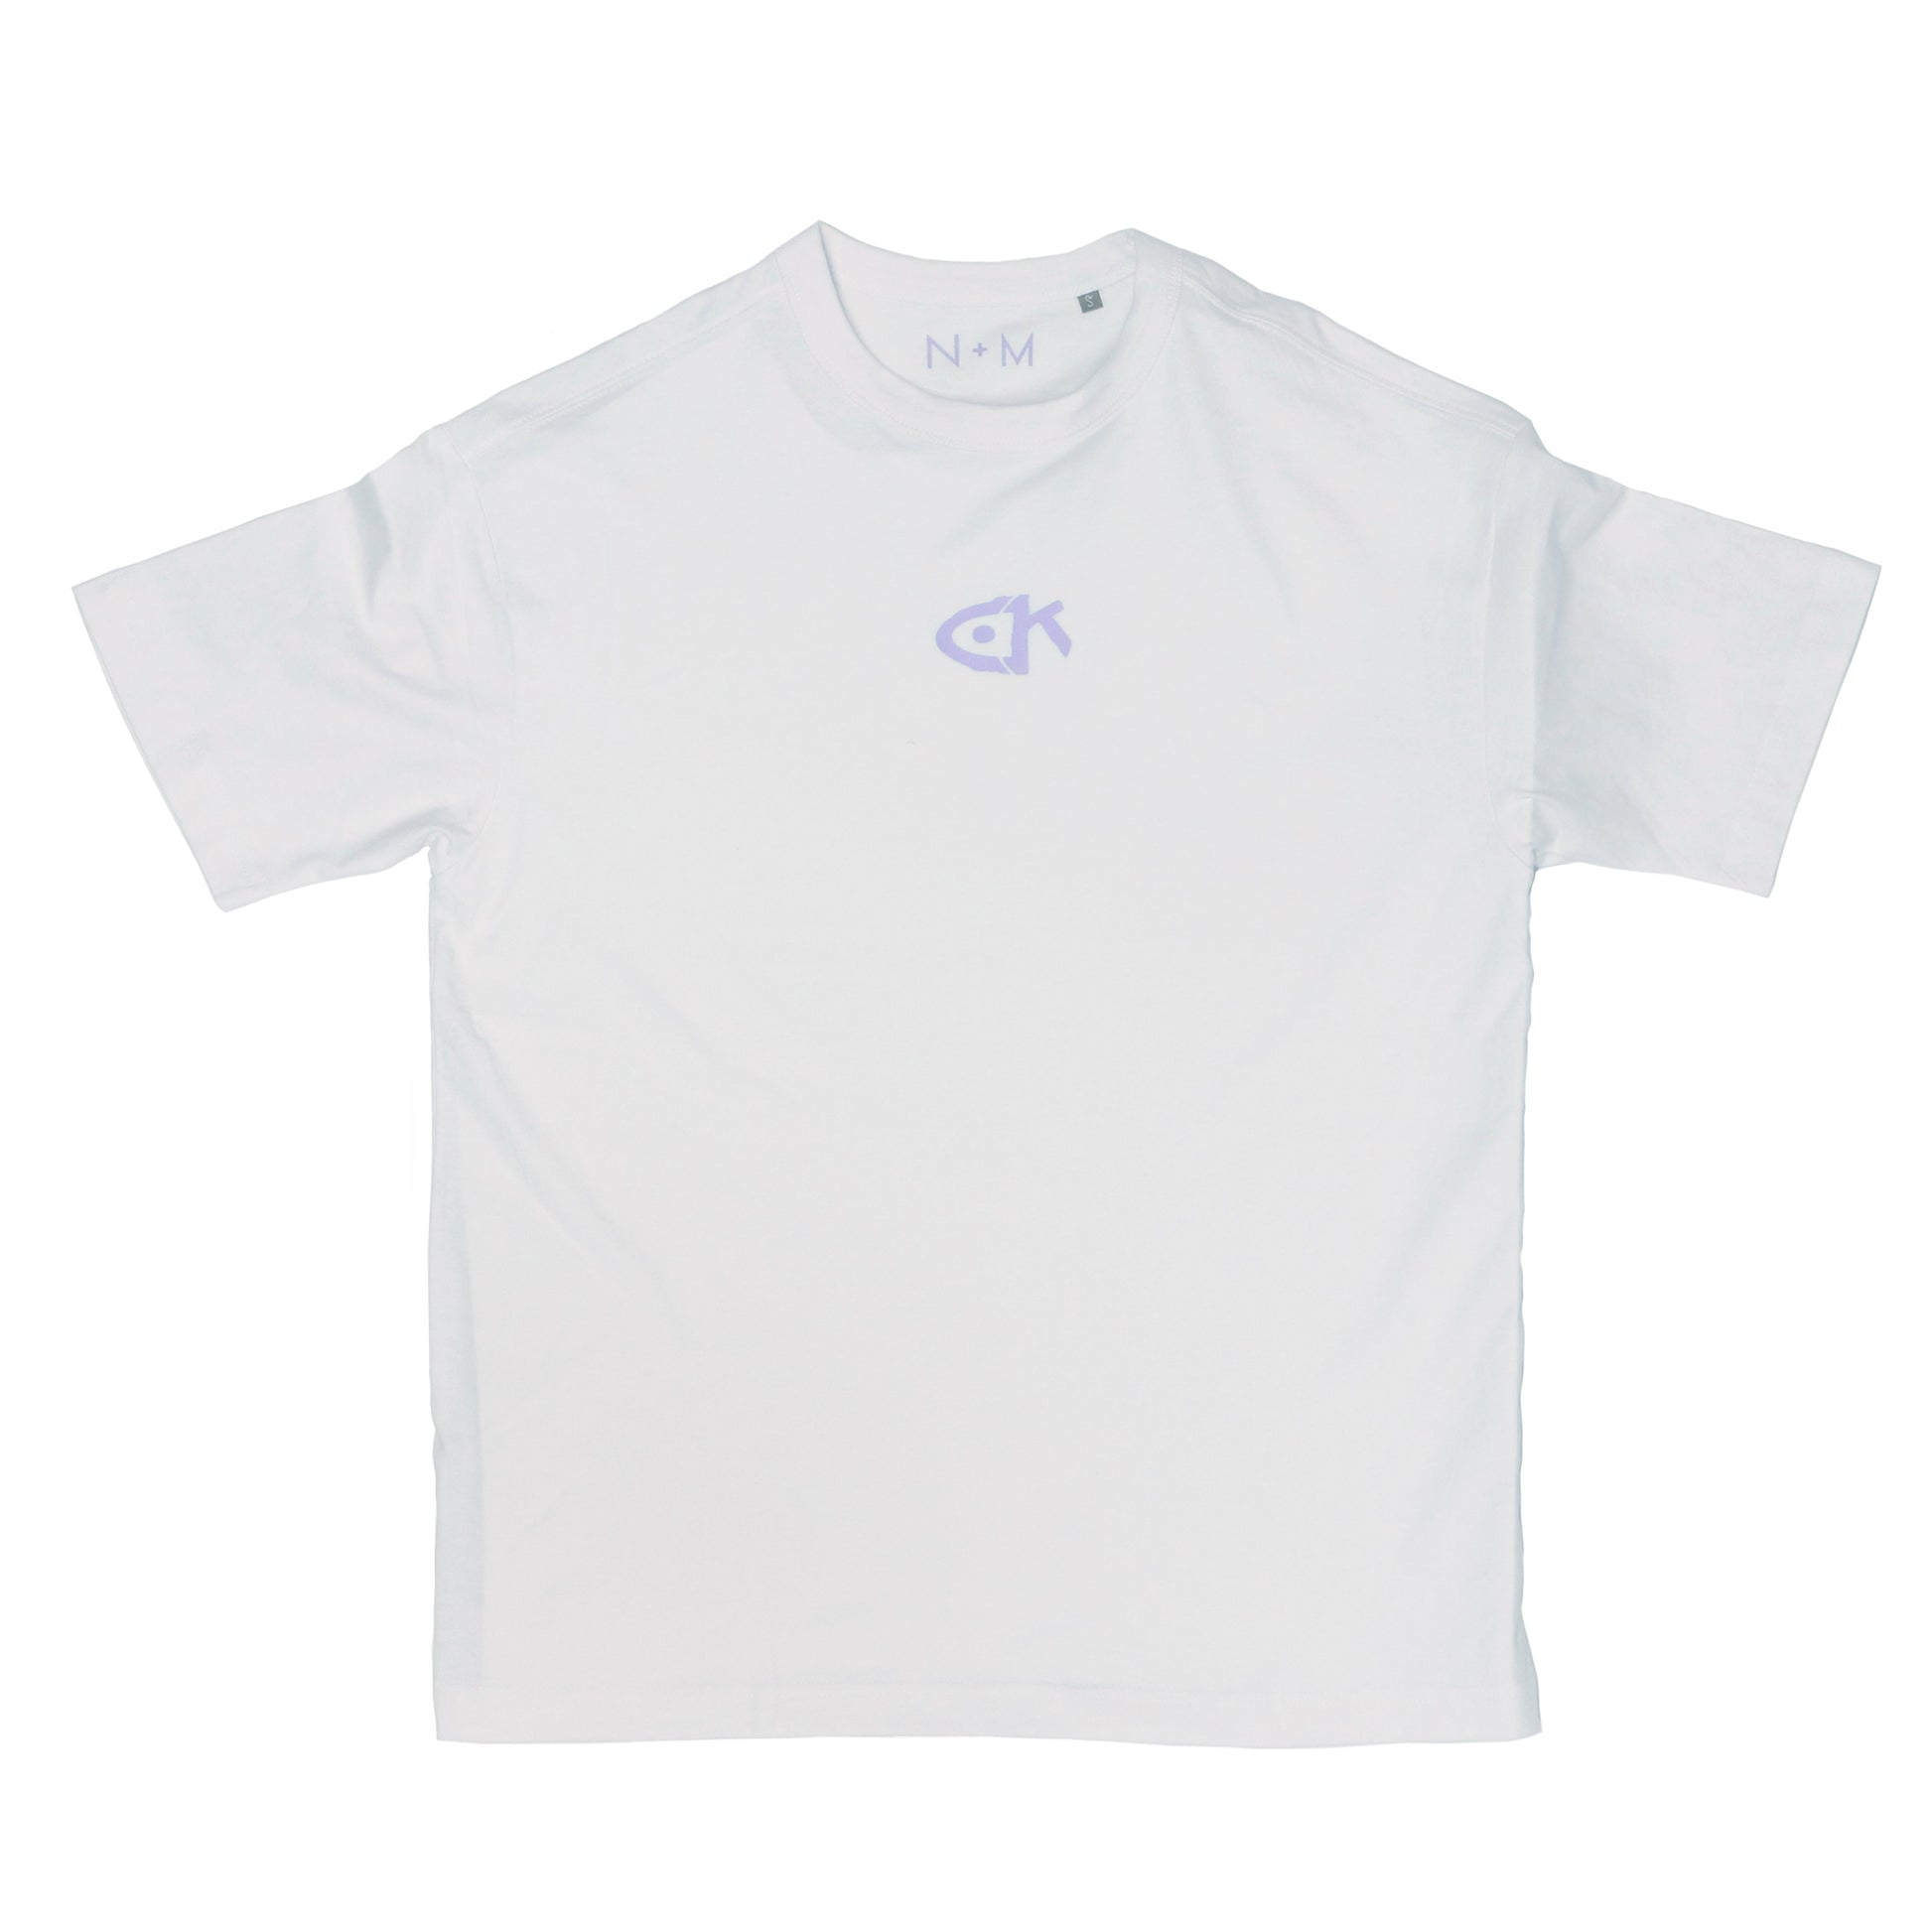 conwy kayak - white oversized t-shirt